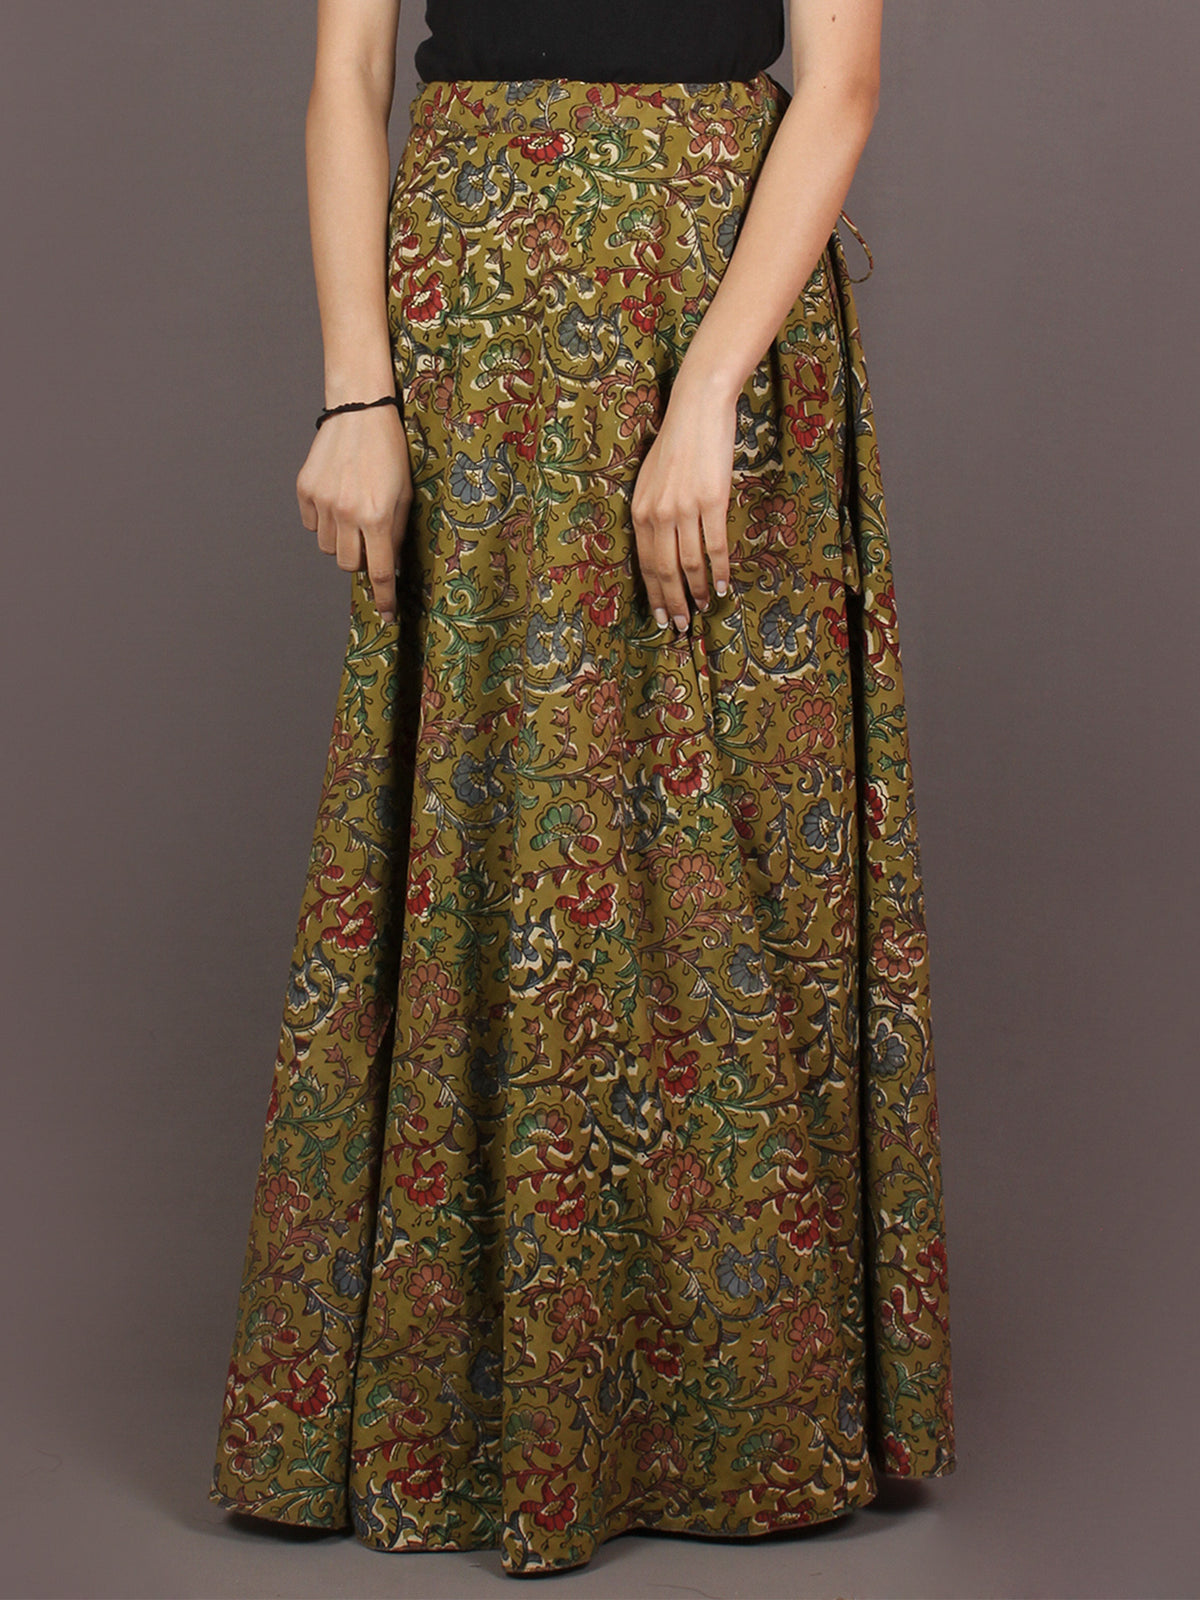 Hand Block Printed Wrap Around Skirt In Asparagus Green Multi Colour - S4010011